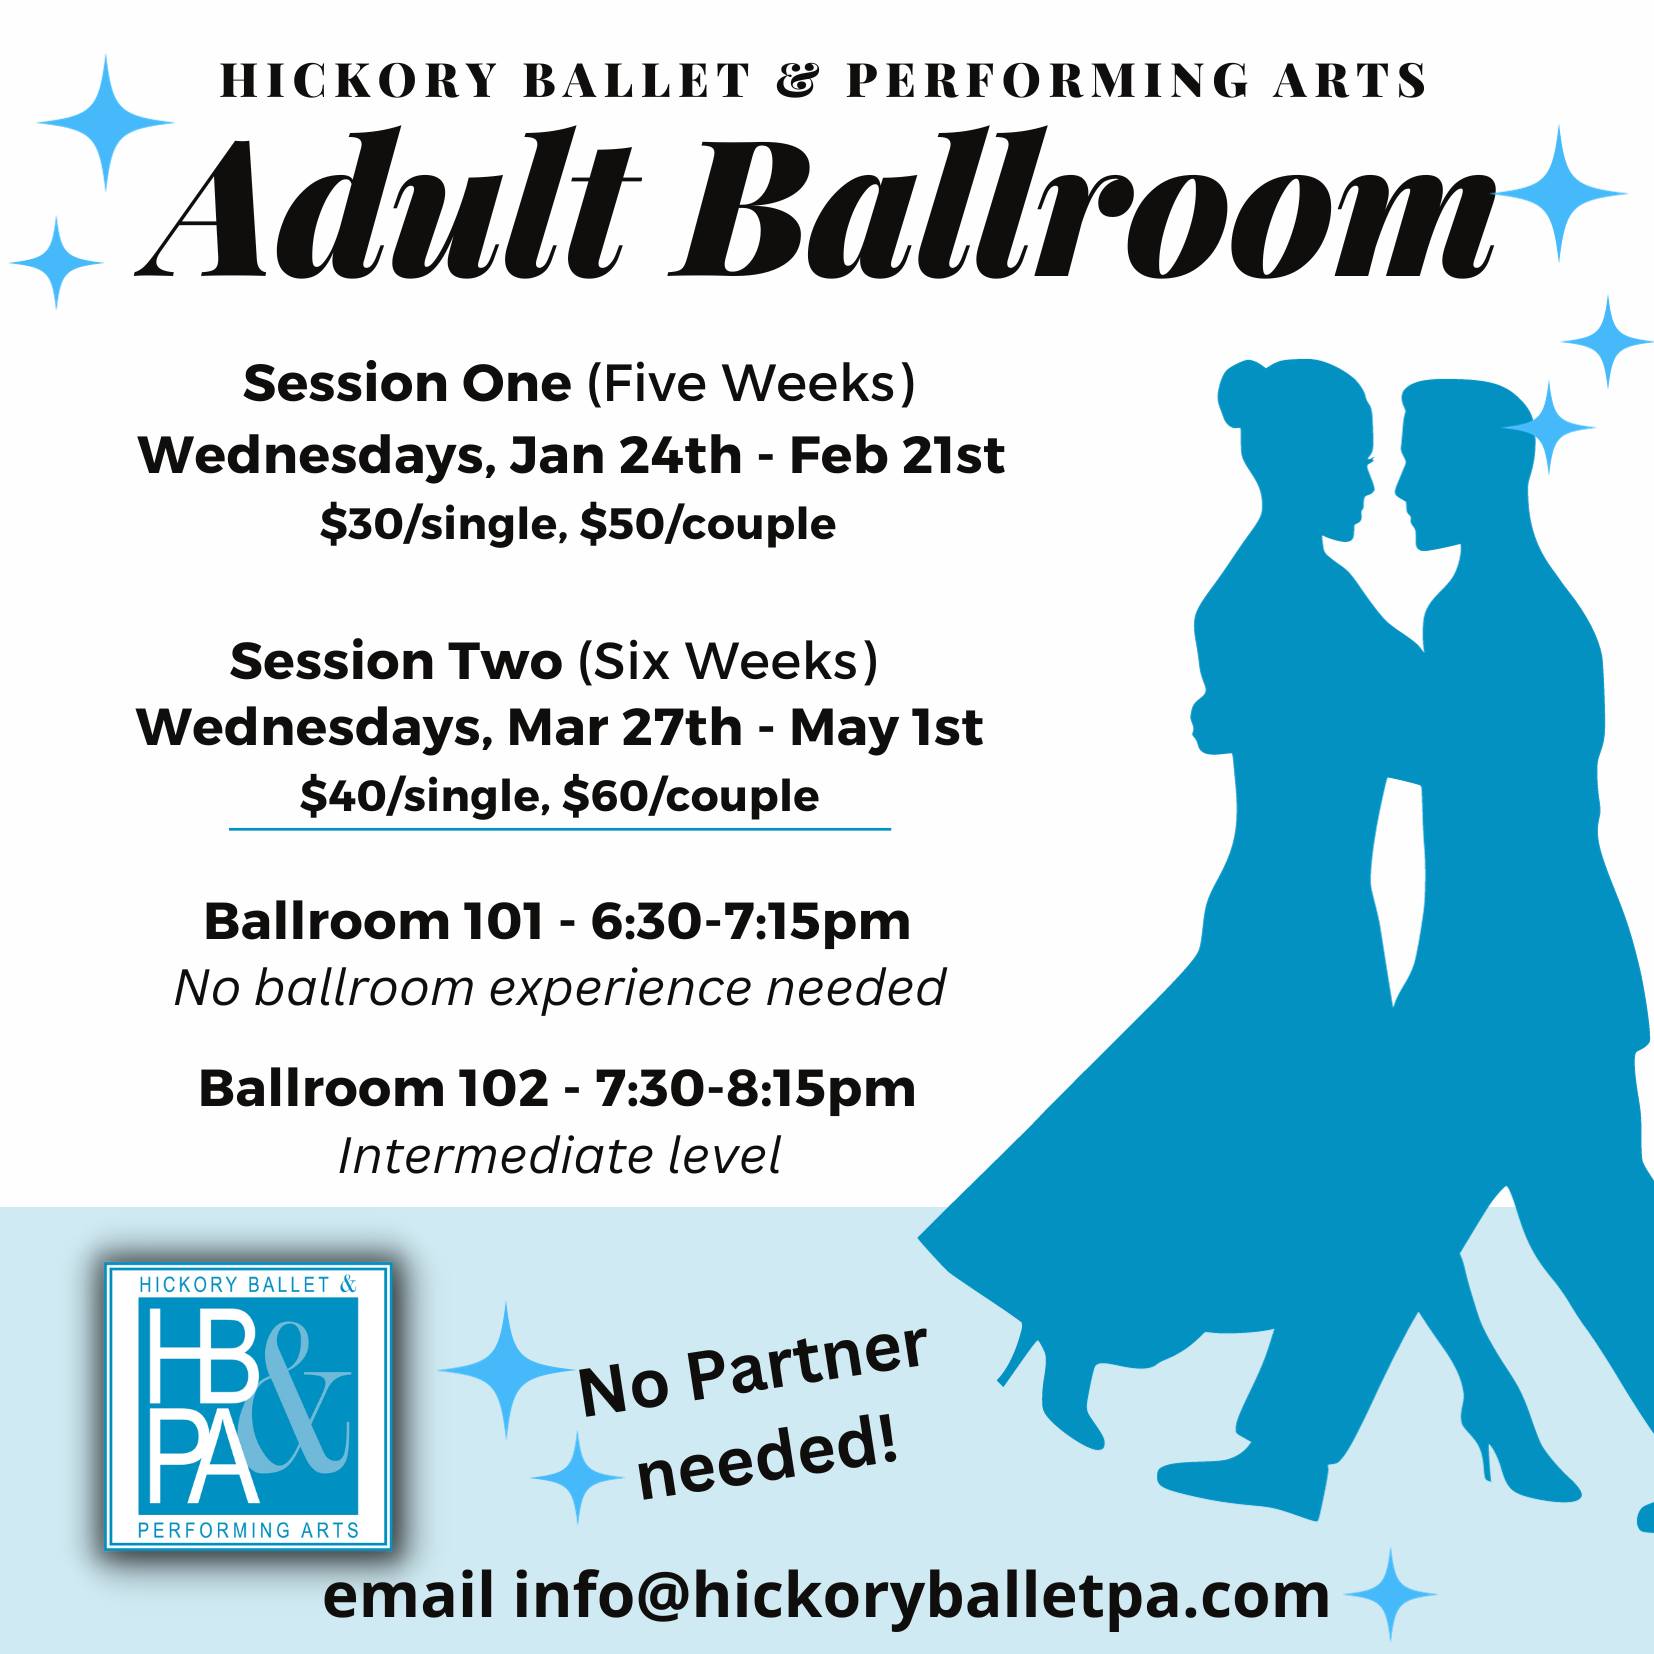 Spring Ballroom Sessions Announced!